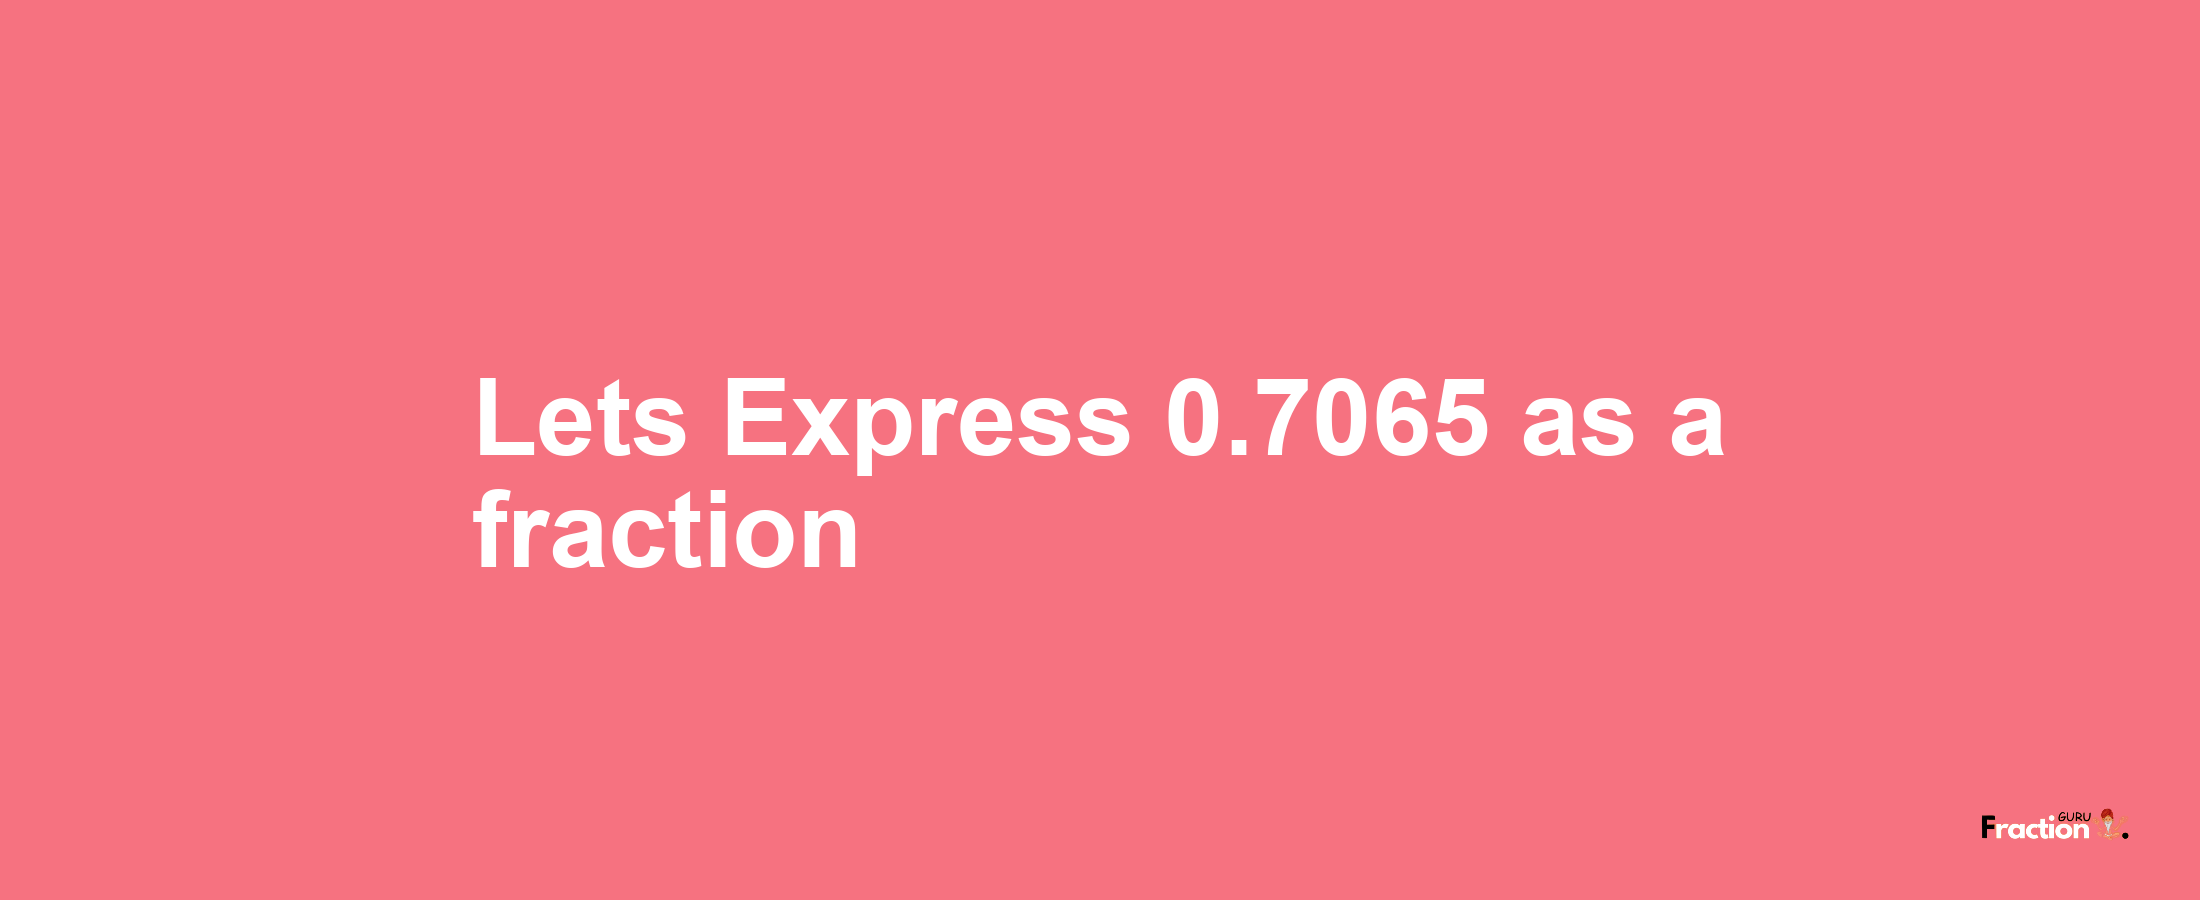 Lets Express 0.7065 as afraction